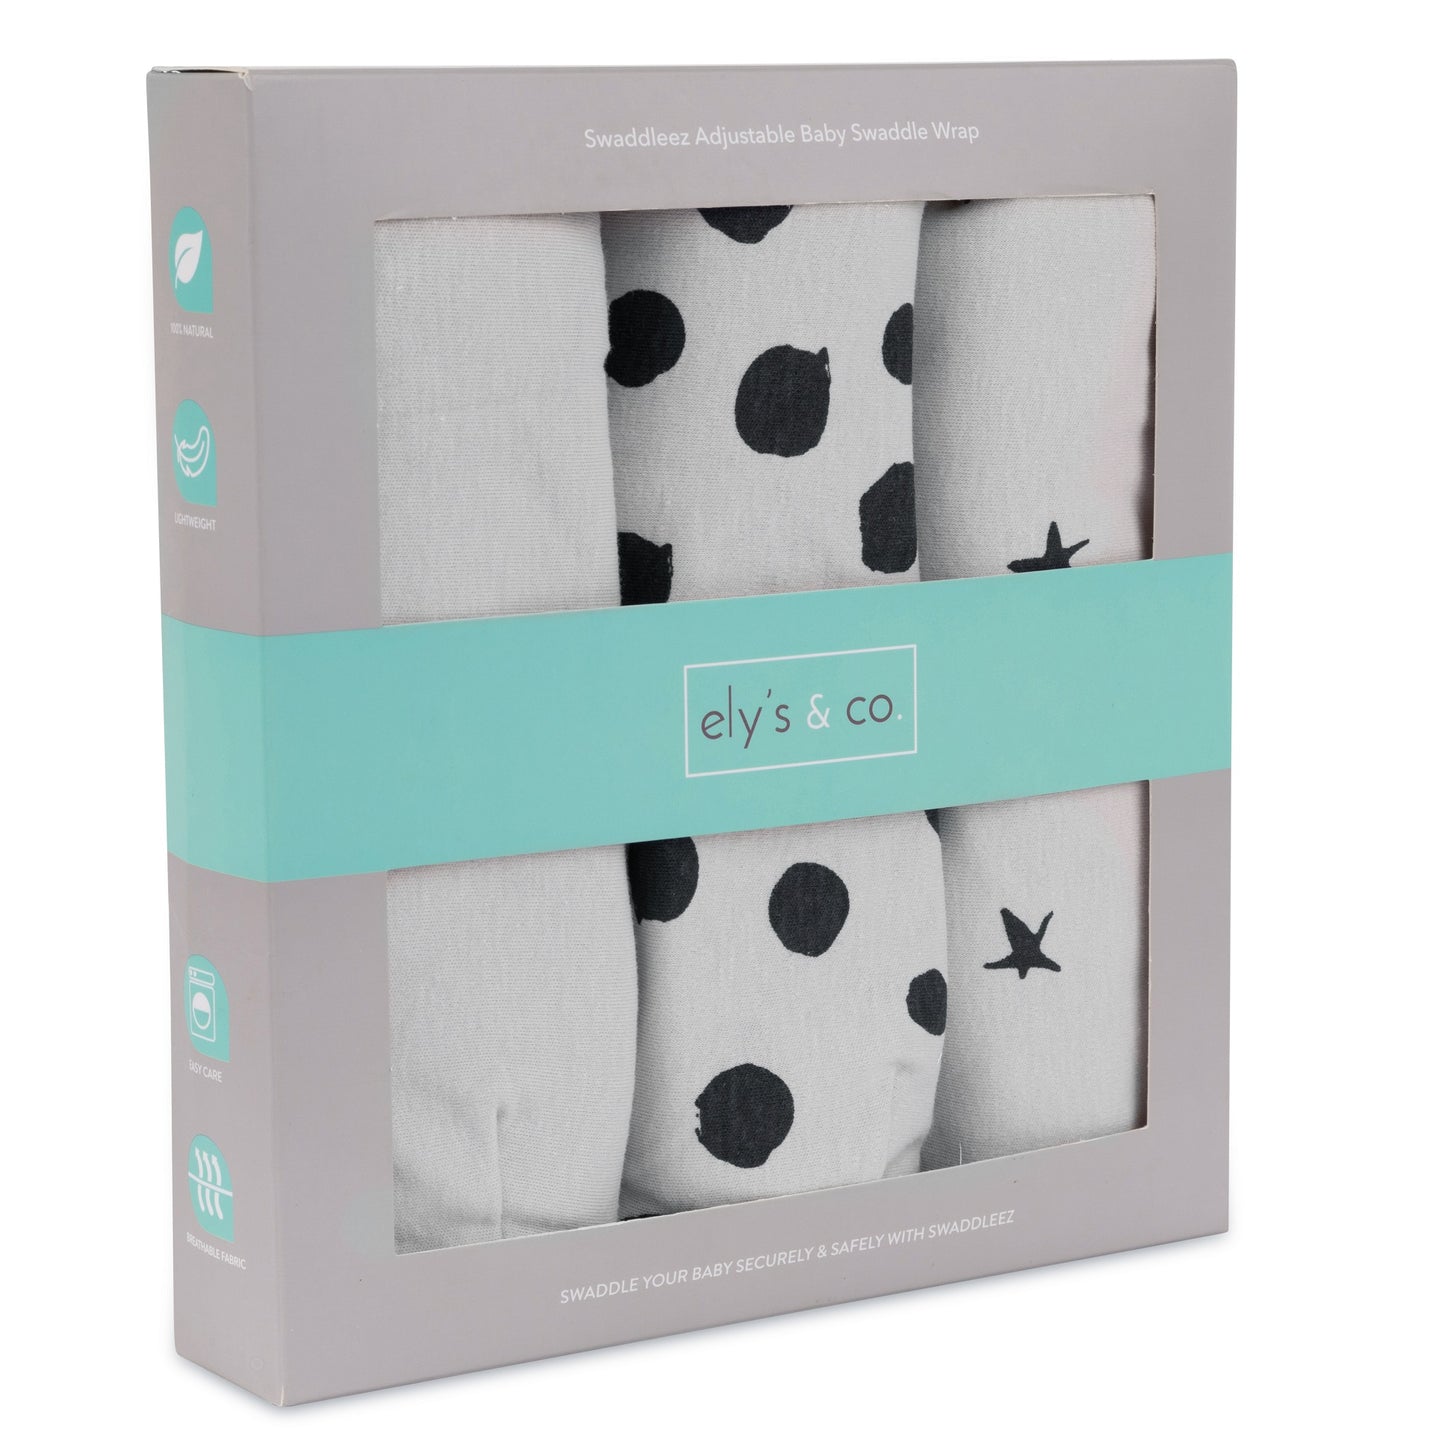 Ely's & Co. Adjustable Swaddle (3 Pack)